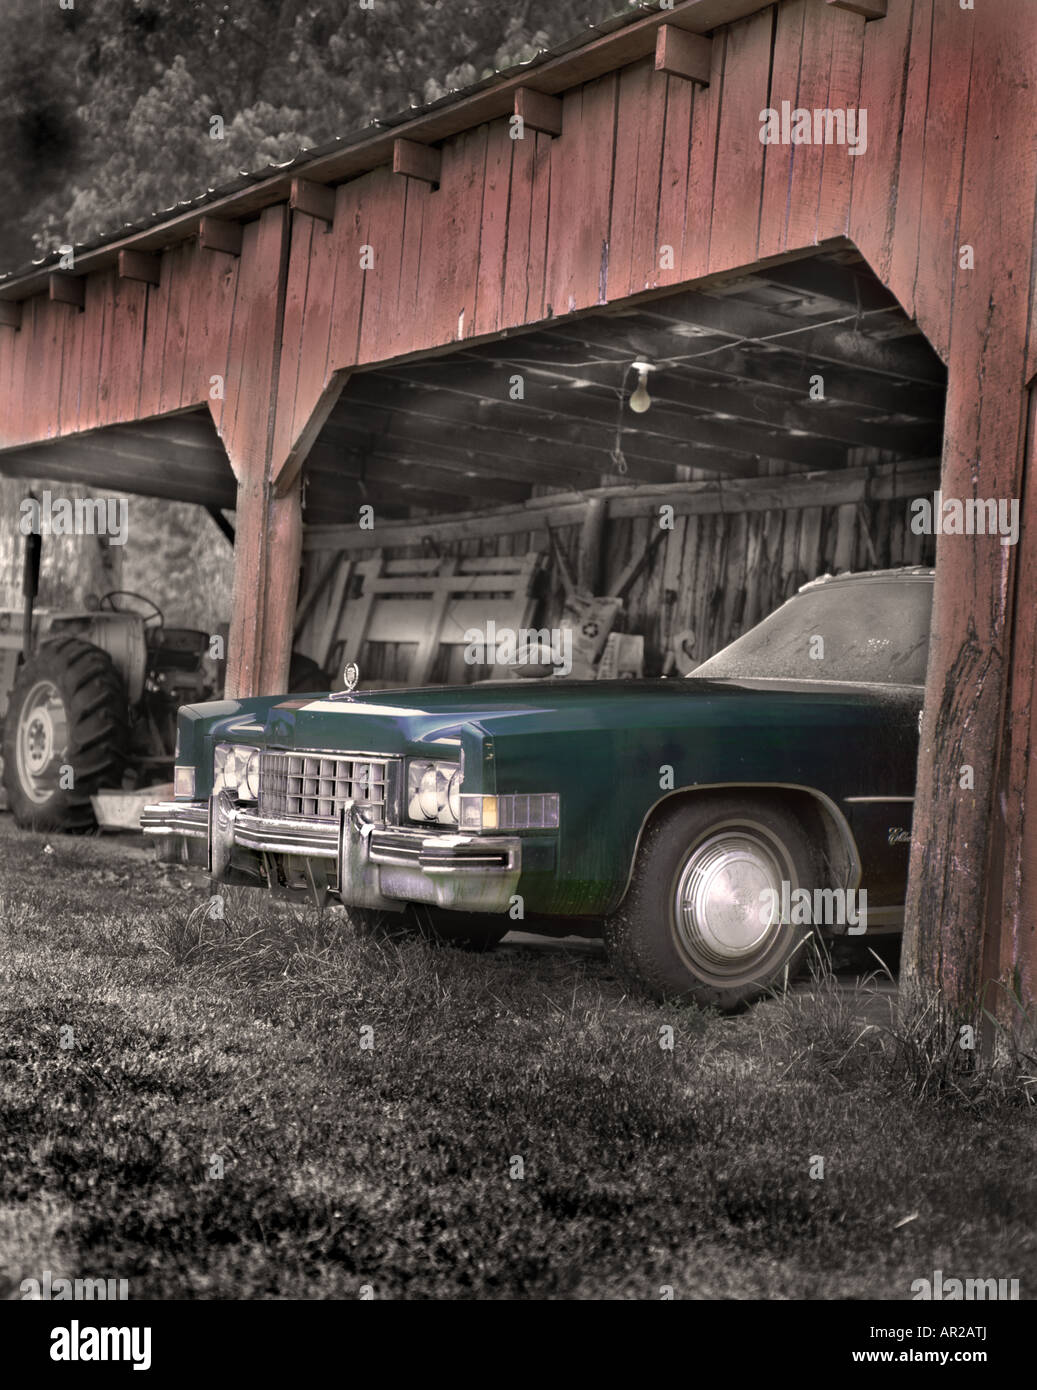 green Cadillac parked in a red barn Stock Photo